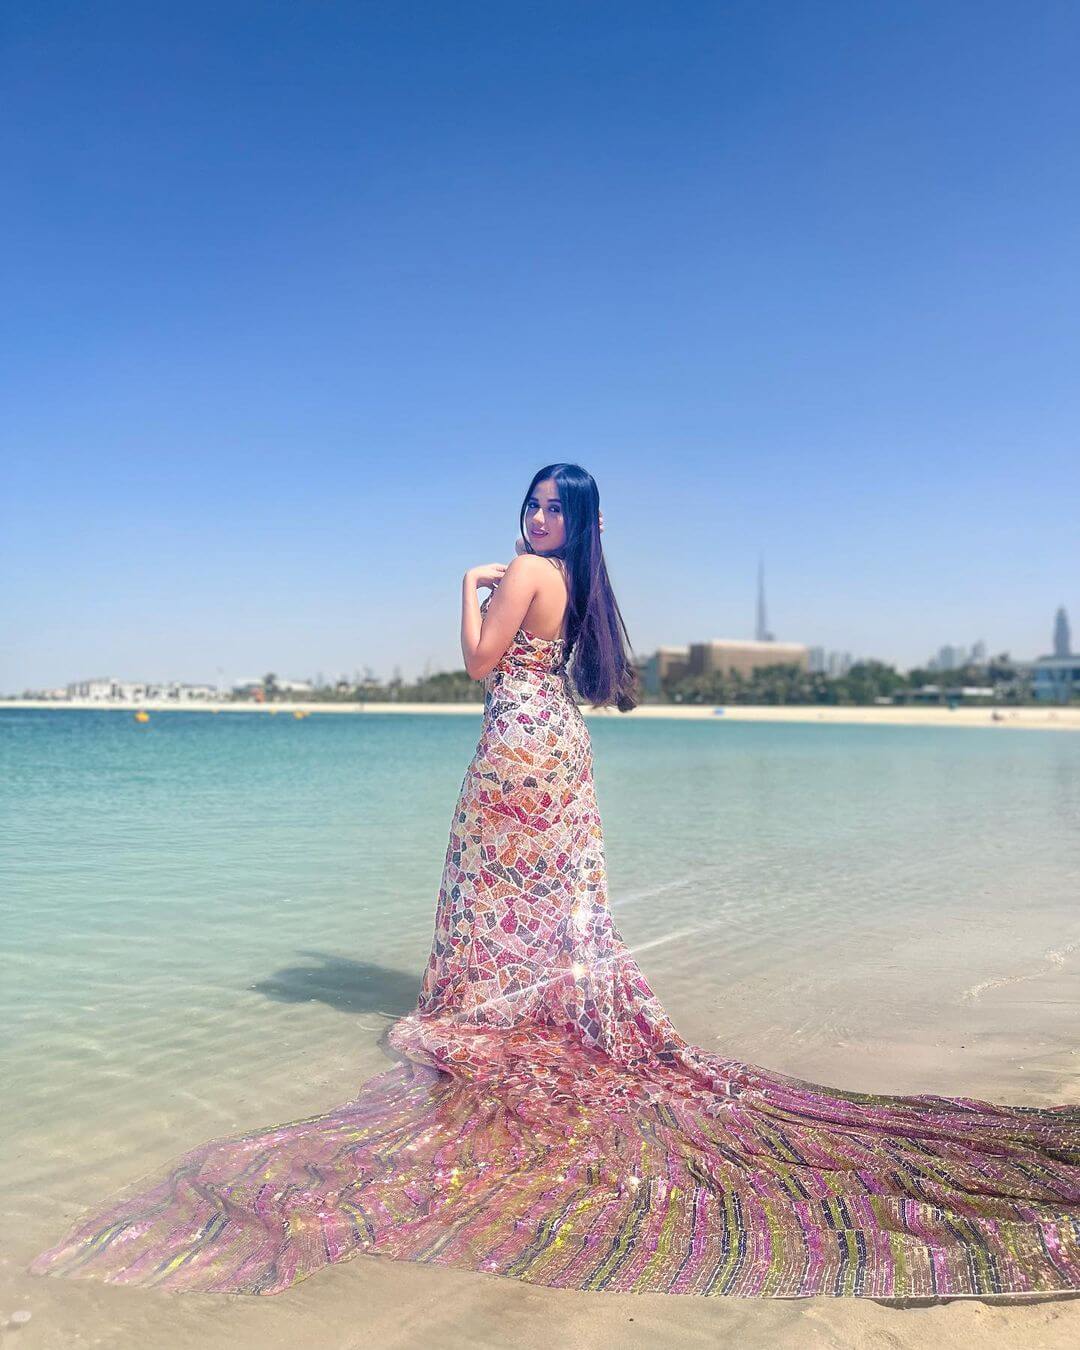 Top Indian Female Celebrity Inspired Outfits- Jannat Zubair's Fabulous Look In Shimmering Fish-Tailed Mirrorwork Gown